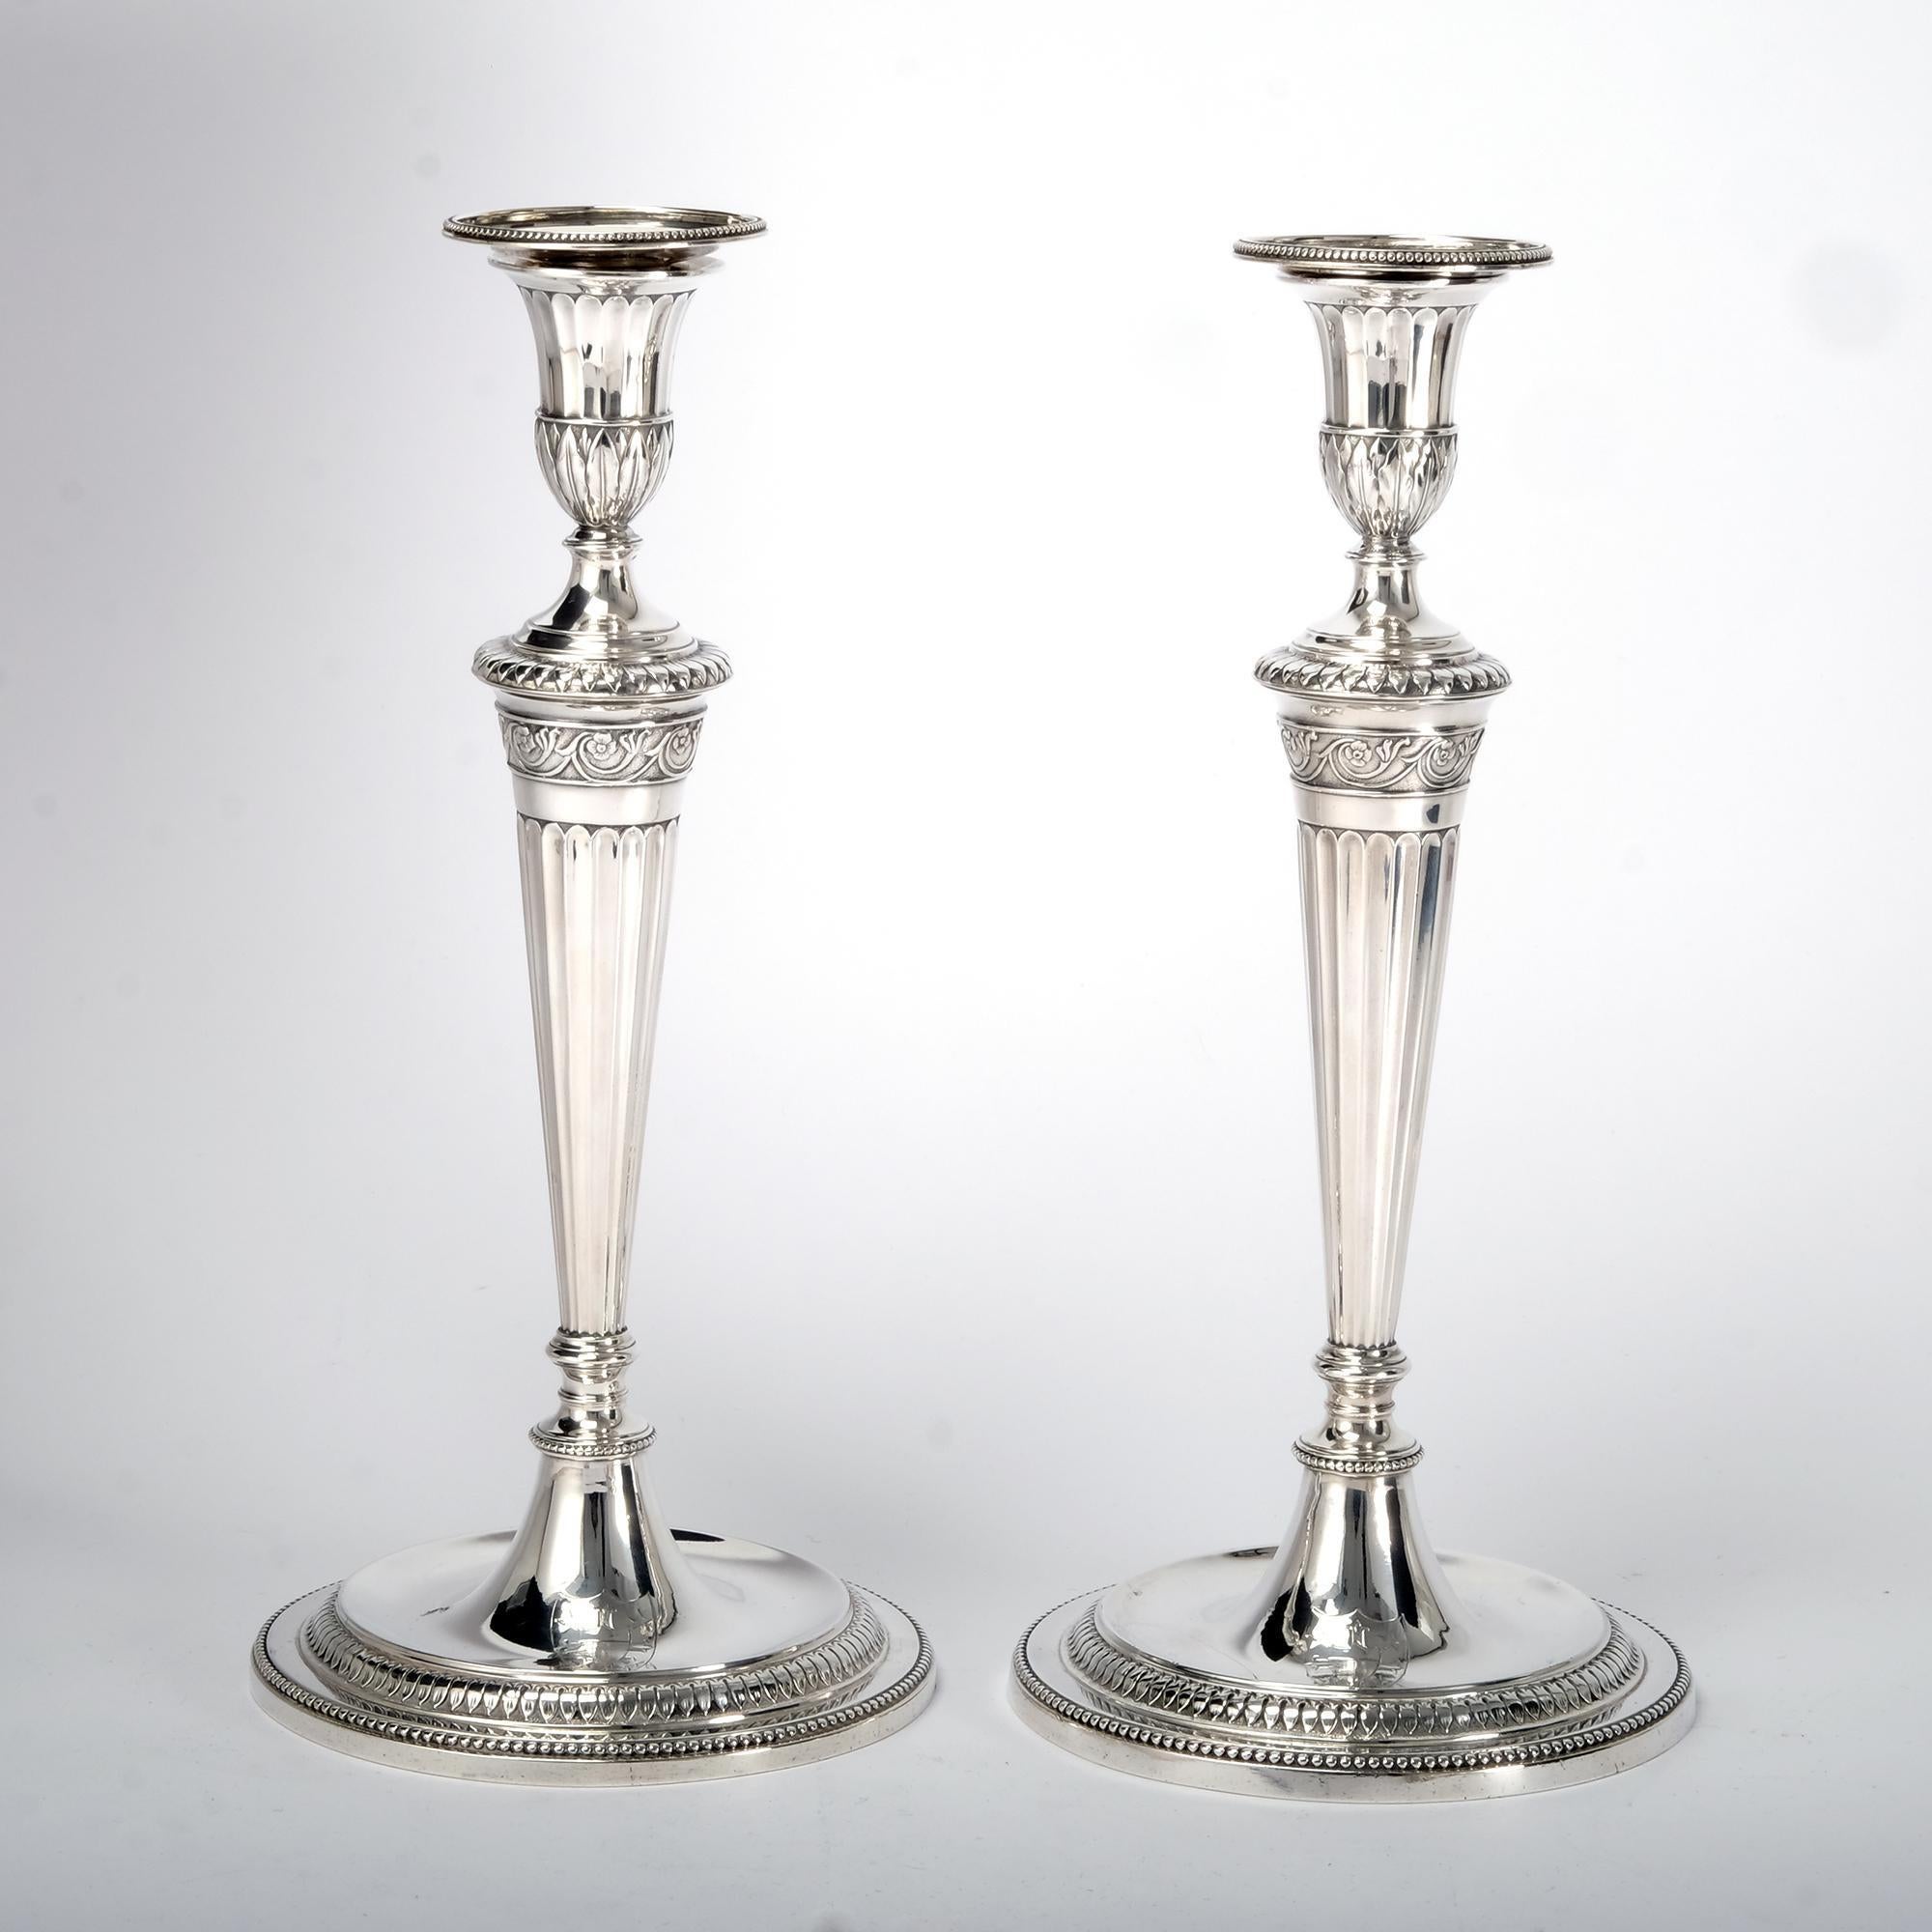 Exceptionally fine pair of antique George III silver candlesticks. Each candlestick has a round sunken well base with beaded border and a band of leaf decoration. The tapering stems are fluted and feature a band of neoclassical-style leaf and flower